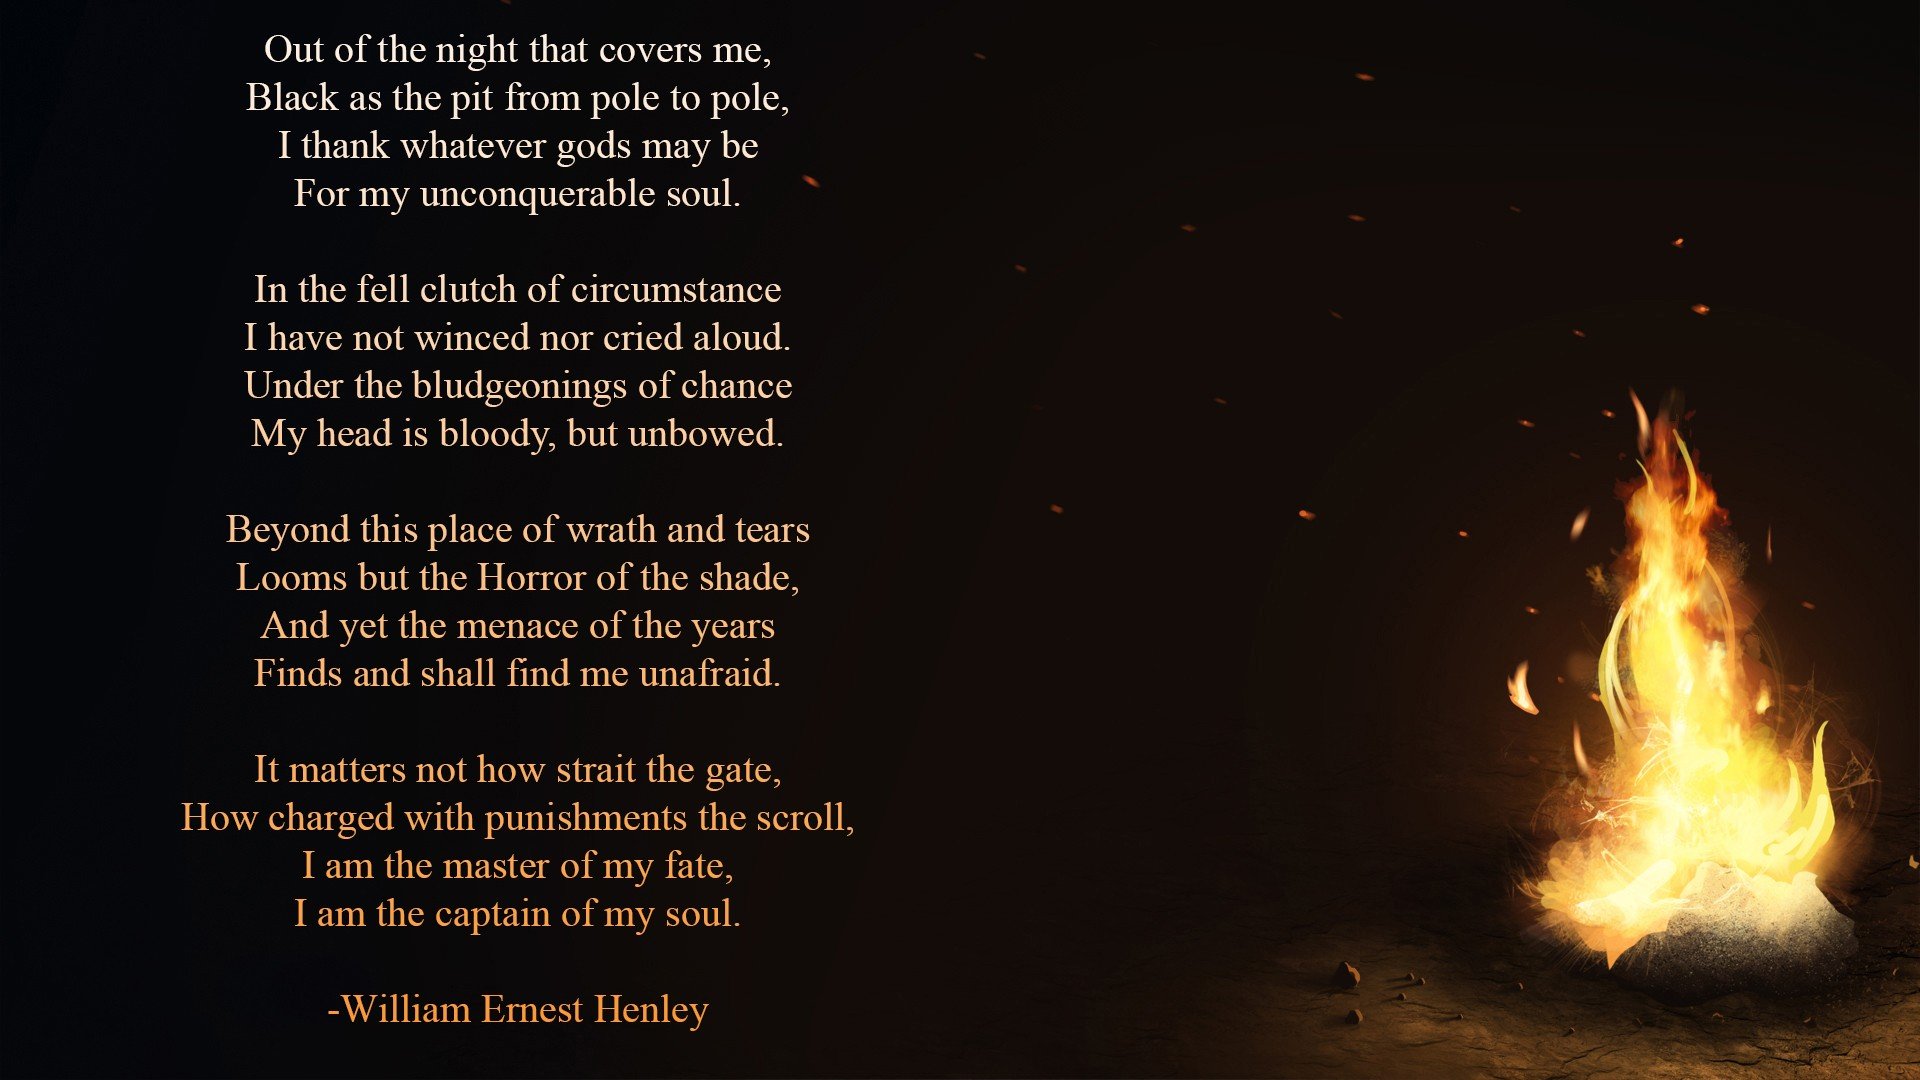 William Ernest Henley, Invictus, Poetry, Fire, Text, Writing Wallpaper